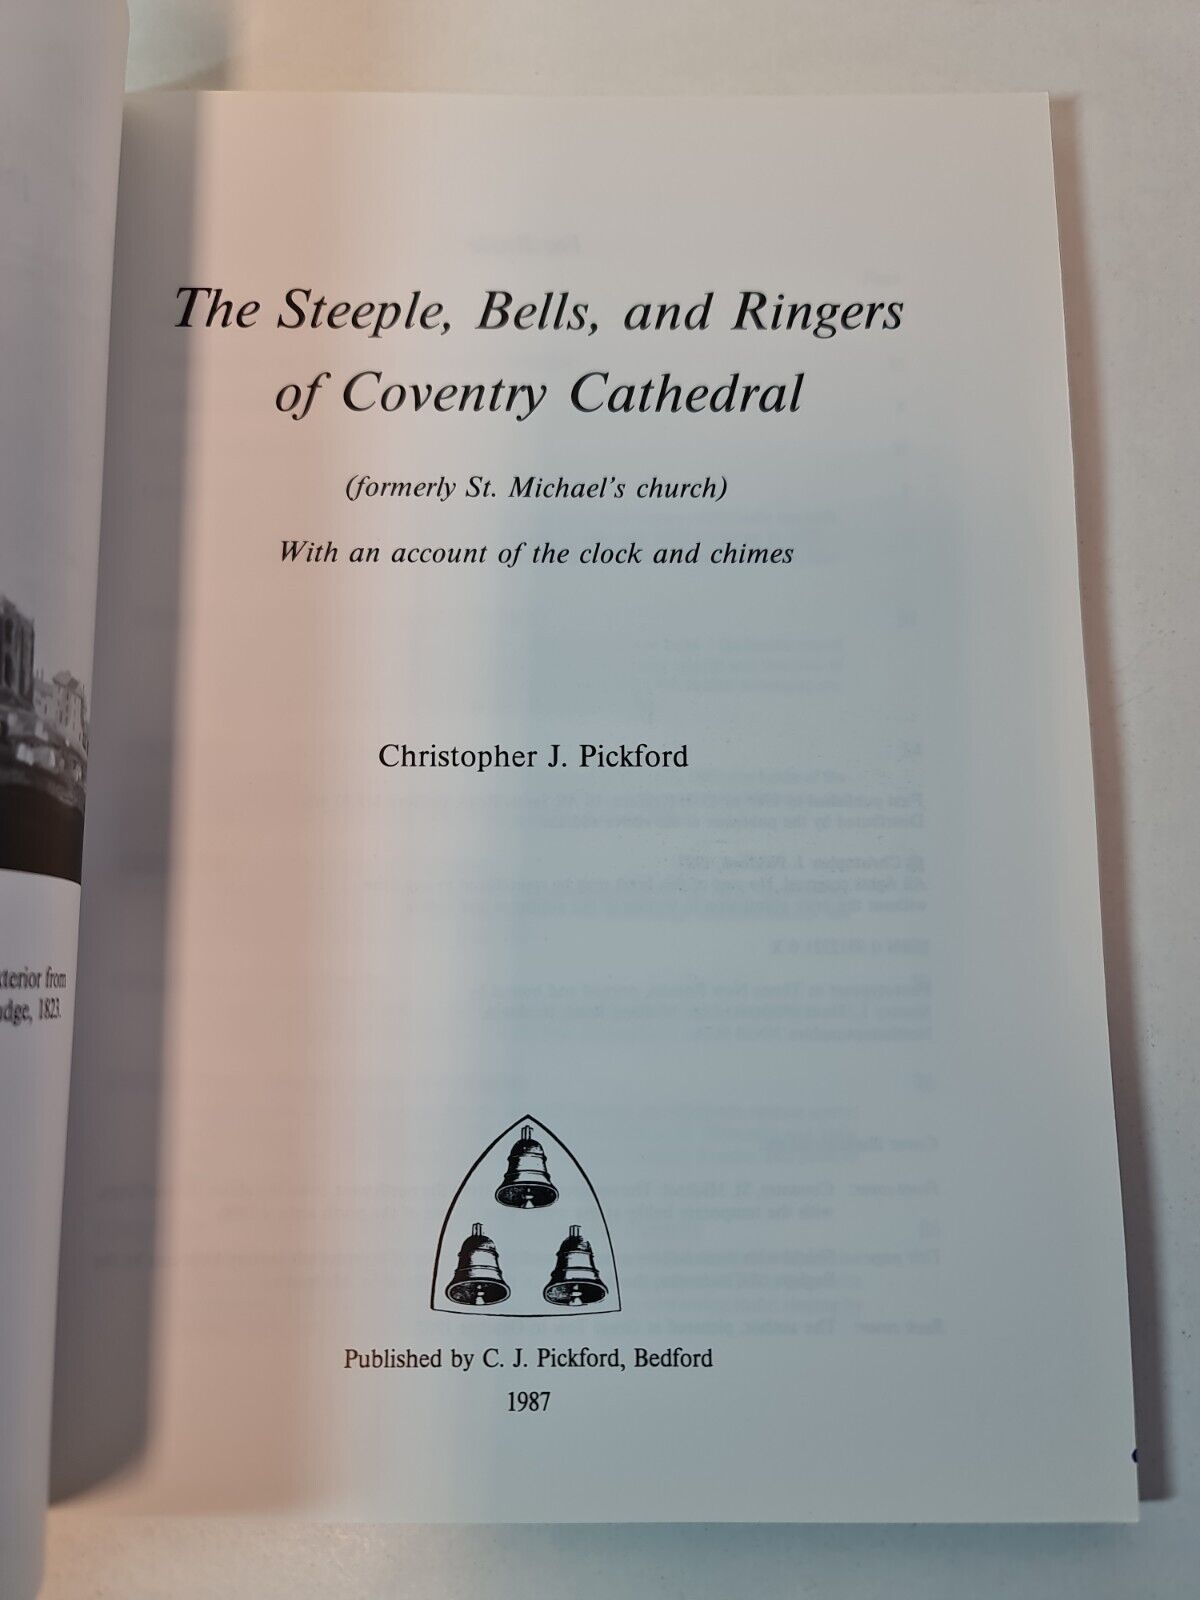 Steeple, Bells and Ringers of Coventry Cathedral by Christopher Pickford